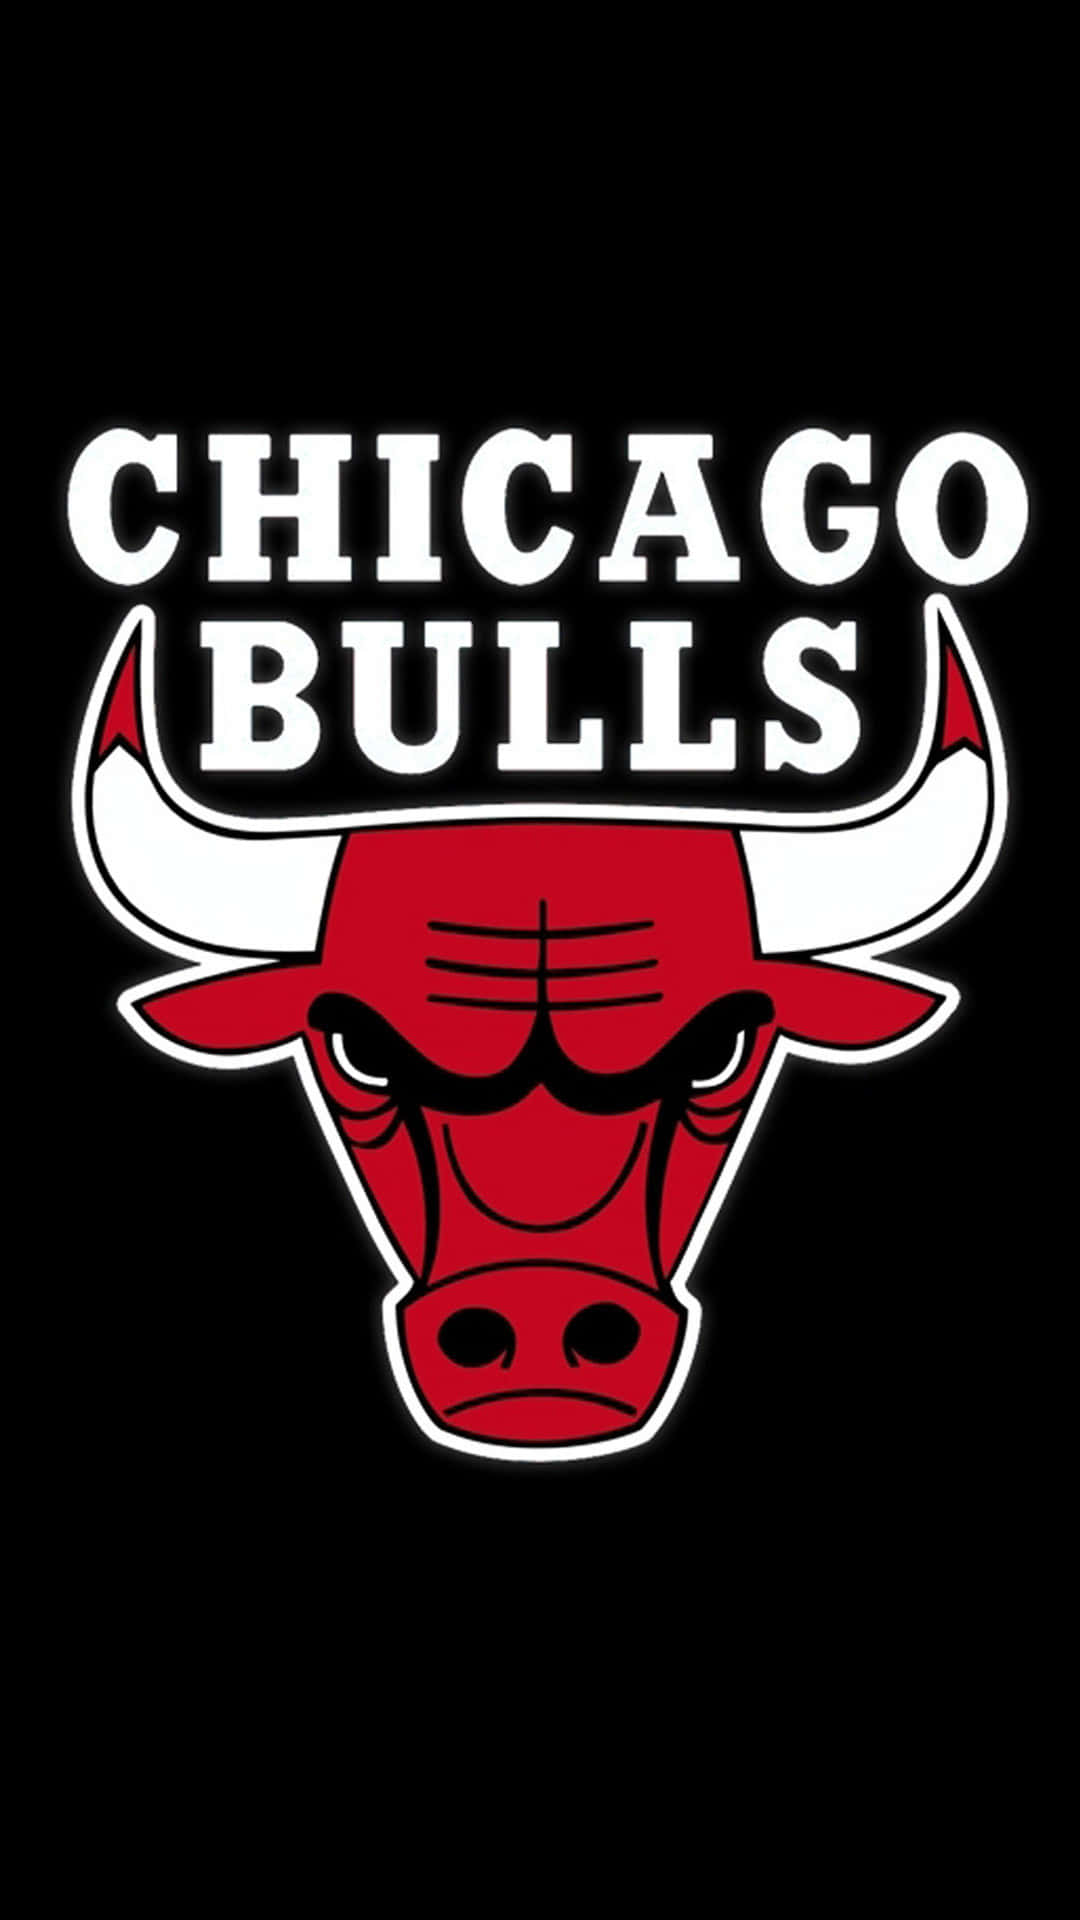 Get Ready for the Championship with the Chicago Bulls iPhone Wallpaper